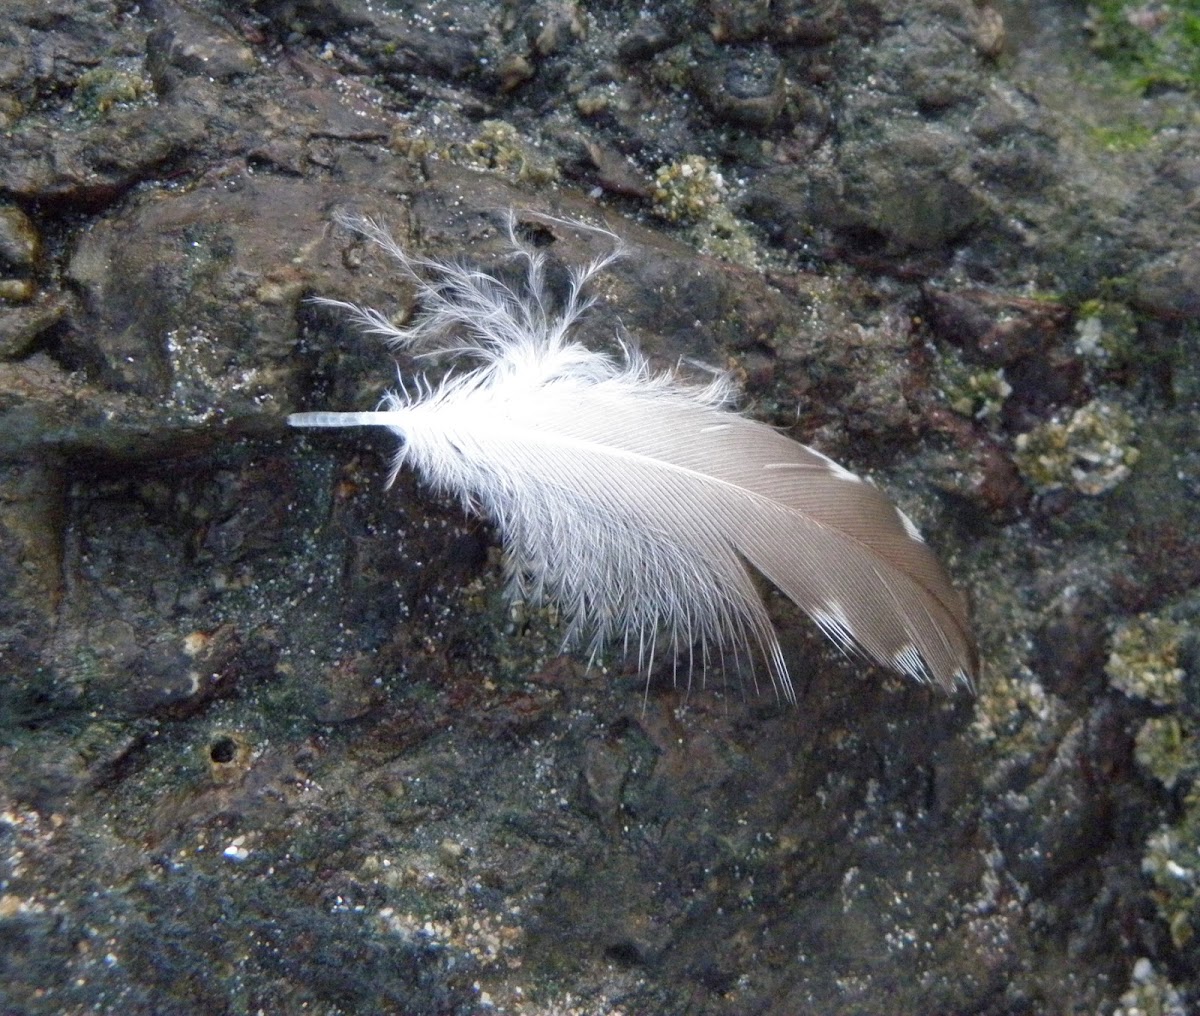 feather(spotted sandpiper?)